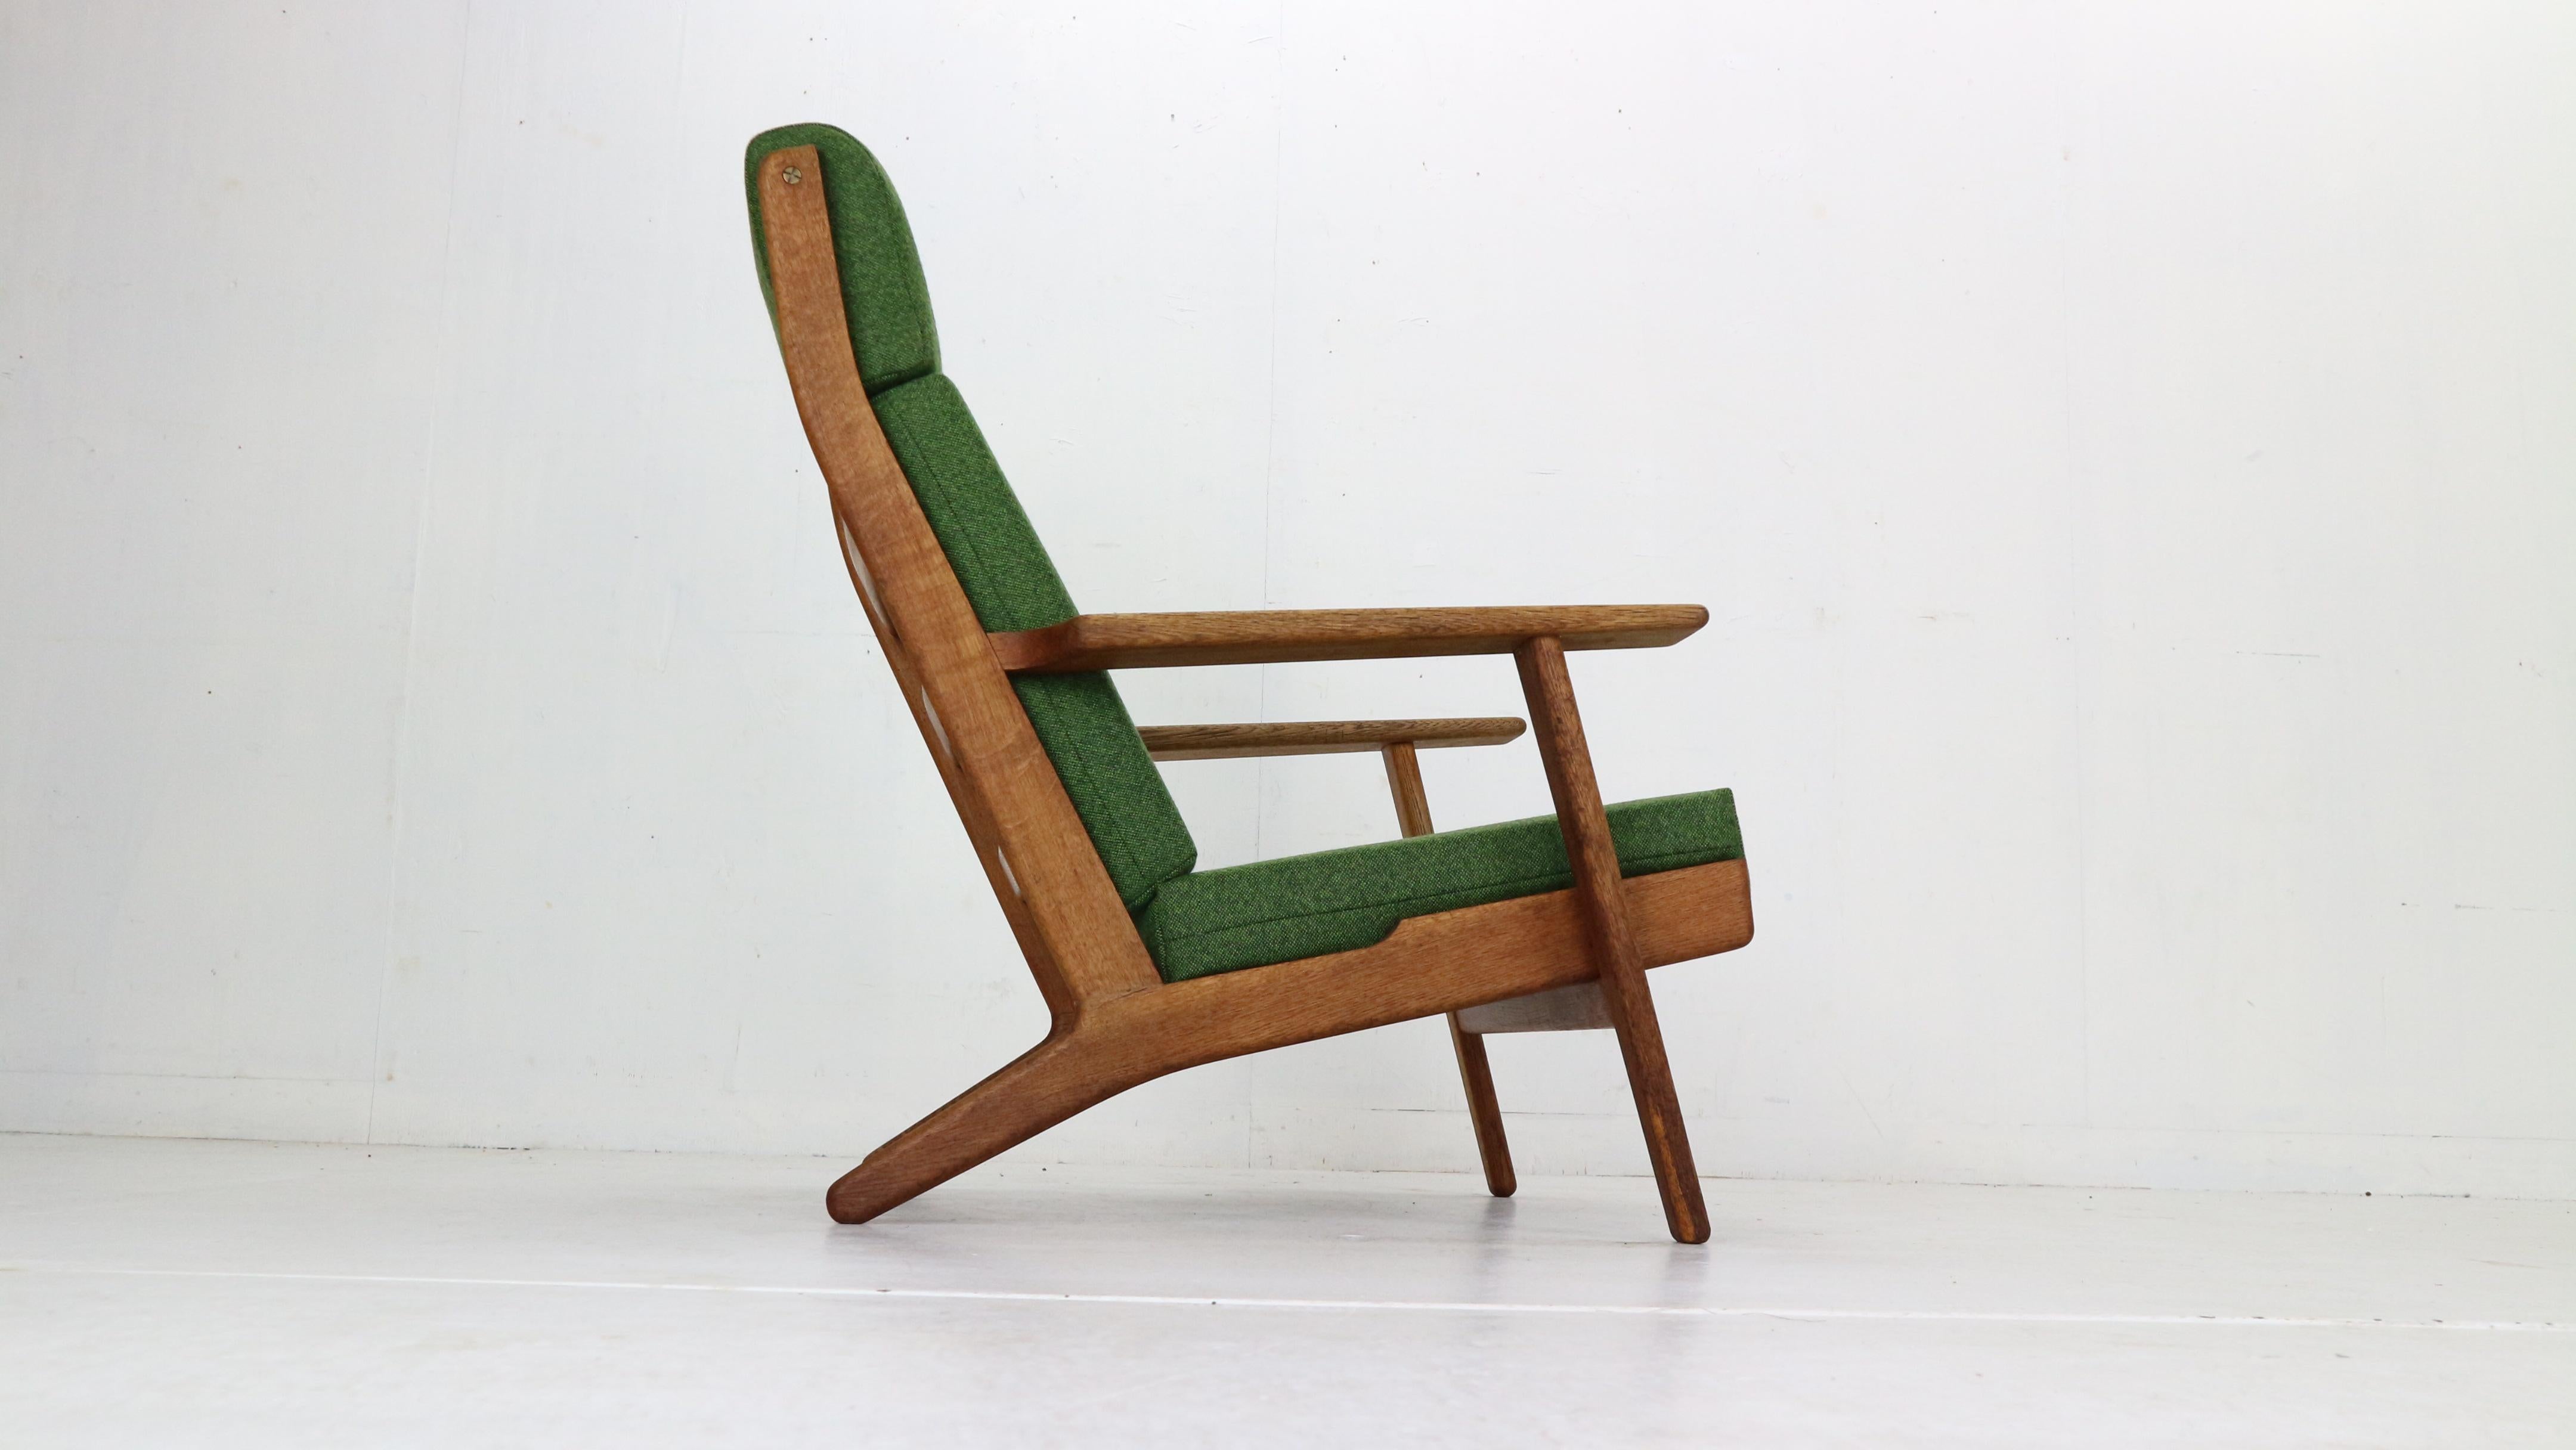 Scandinavian Modern period lounge chair or armchair designed by Hans J. Wegner and manufactured by GETAMA in 1960's period, Denmark.

Solid oak chair with elegant curving details and strong wide armrests, high backrests creates the most